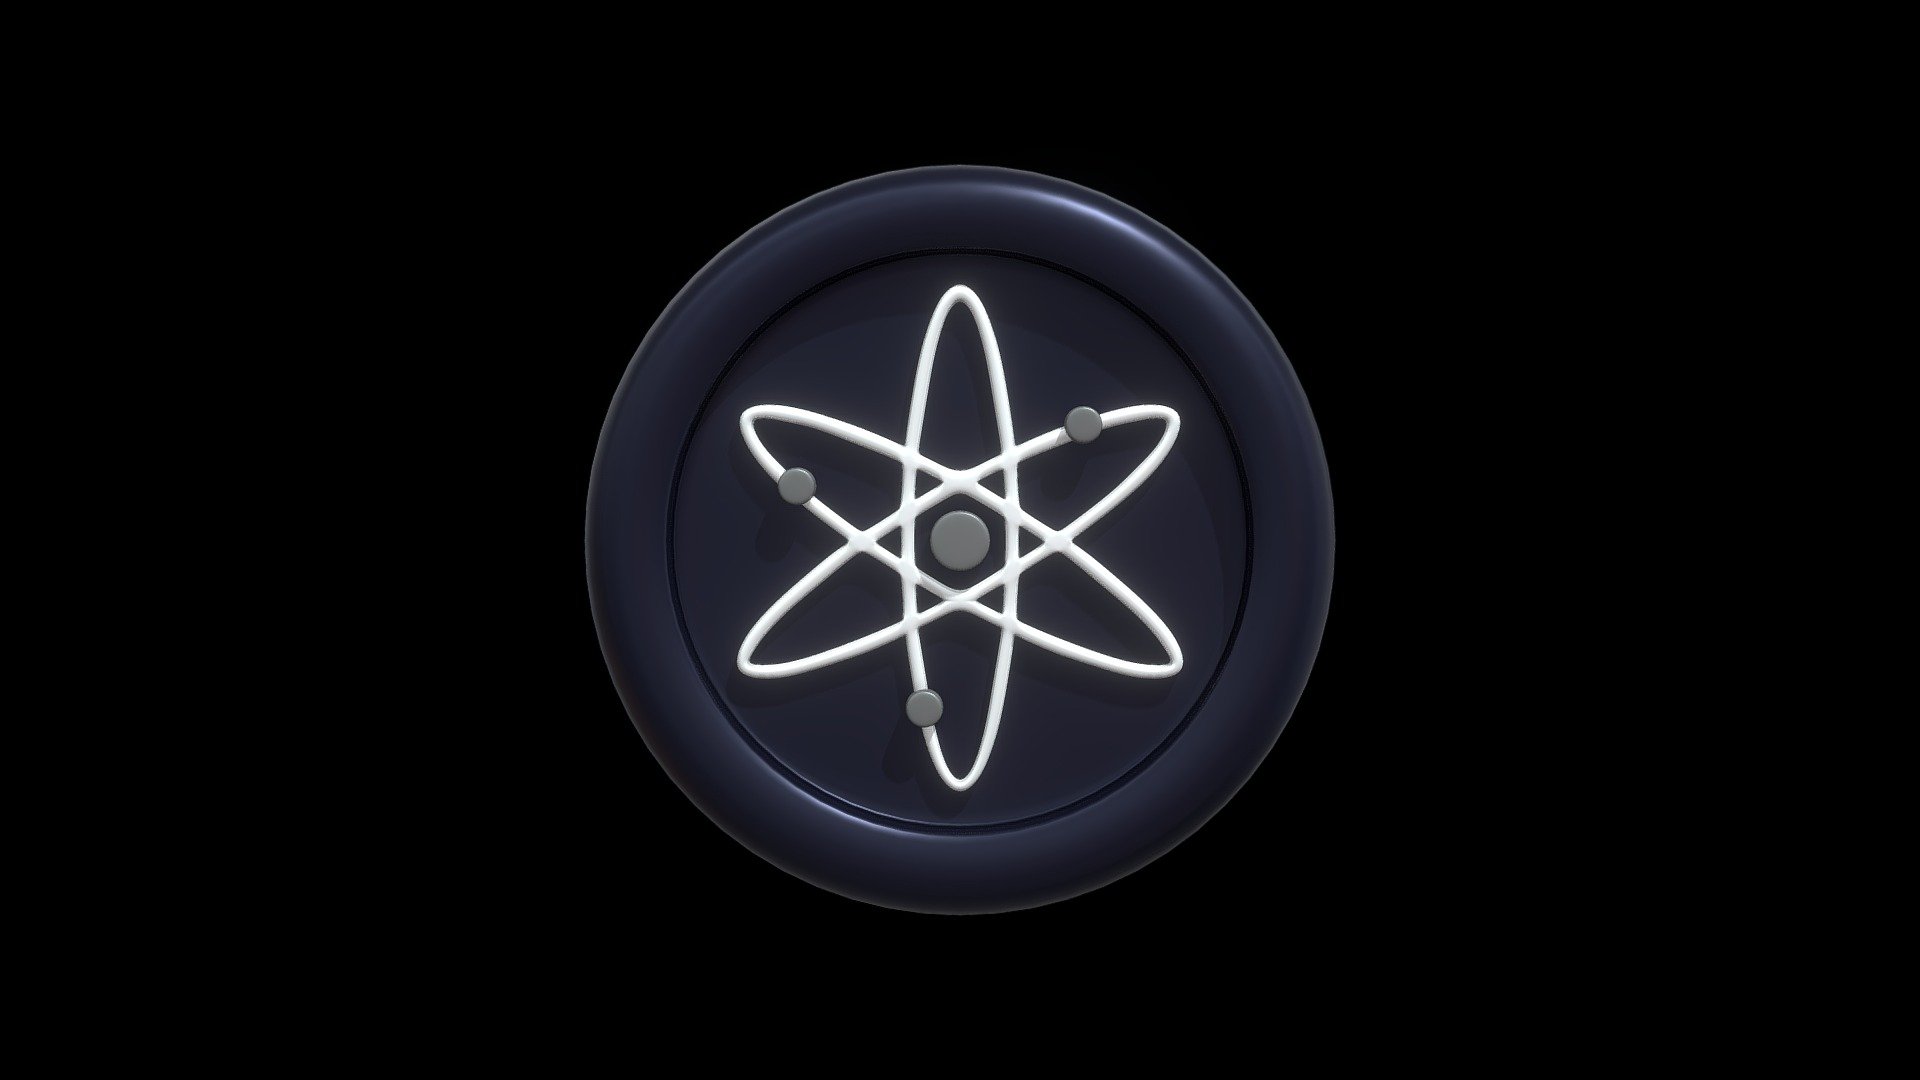 3D Cosmos or ATOM Dark Blue Crypto Coin with cartoon style Made in Blender 3.3.1

This model does include a TEXTURE, DIFFUSE, METALLIC, AND ROUGHNESS MAP, but if you want to change the color you can change it in the blend file, just use the principled bsdf and play with the Roughness, Metallic, and Base Color parameter 3d model